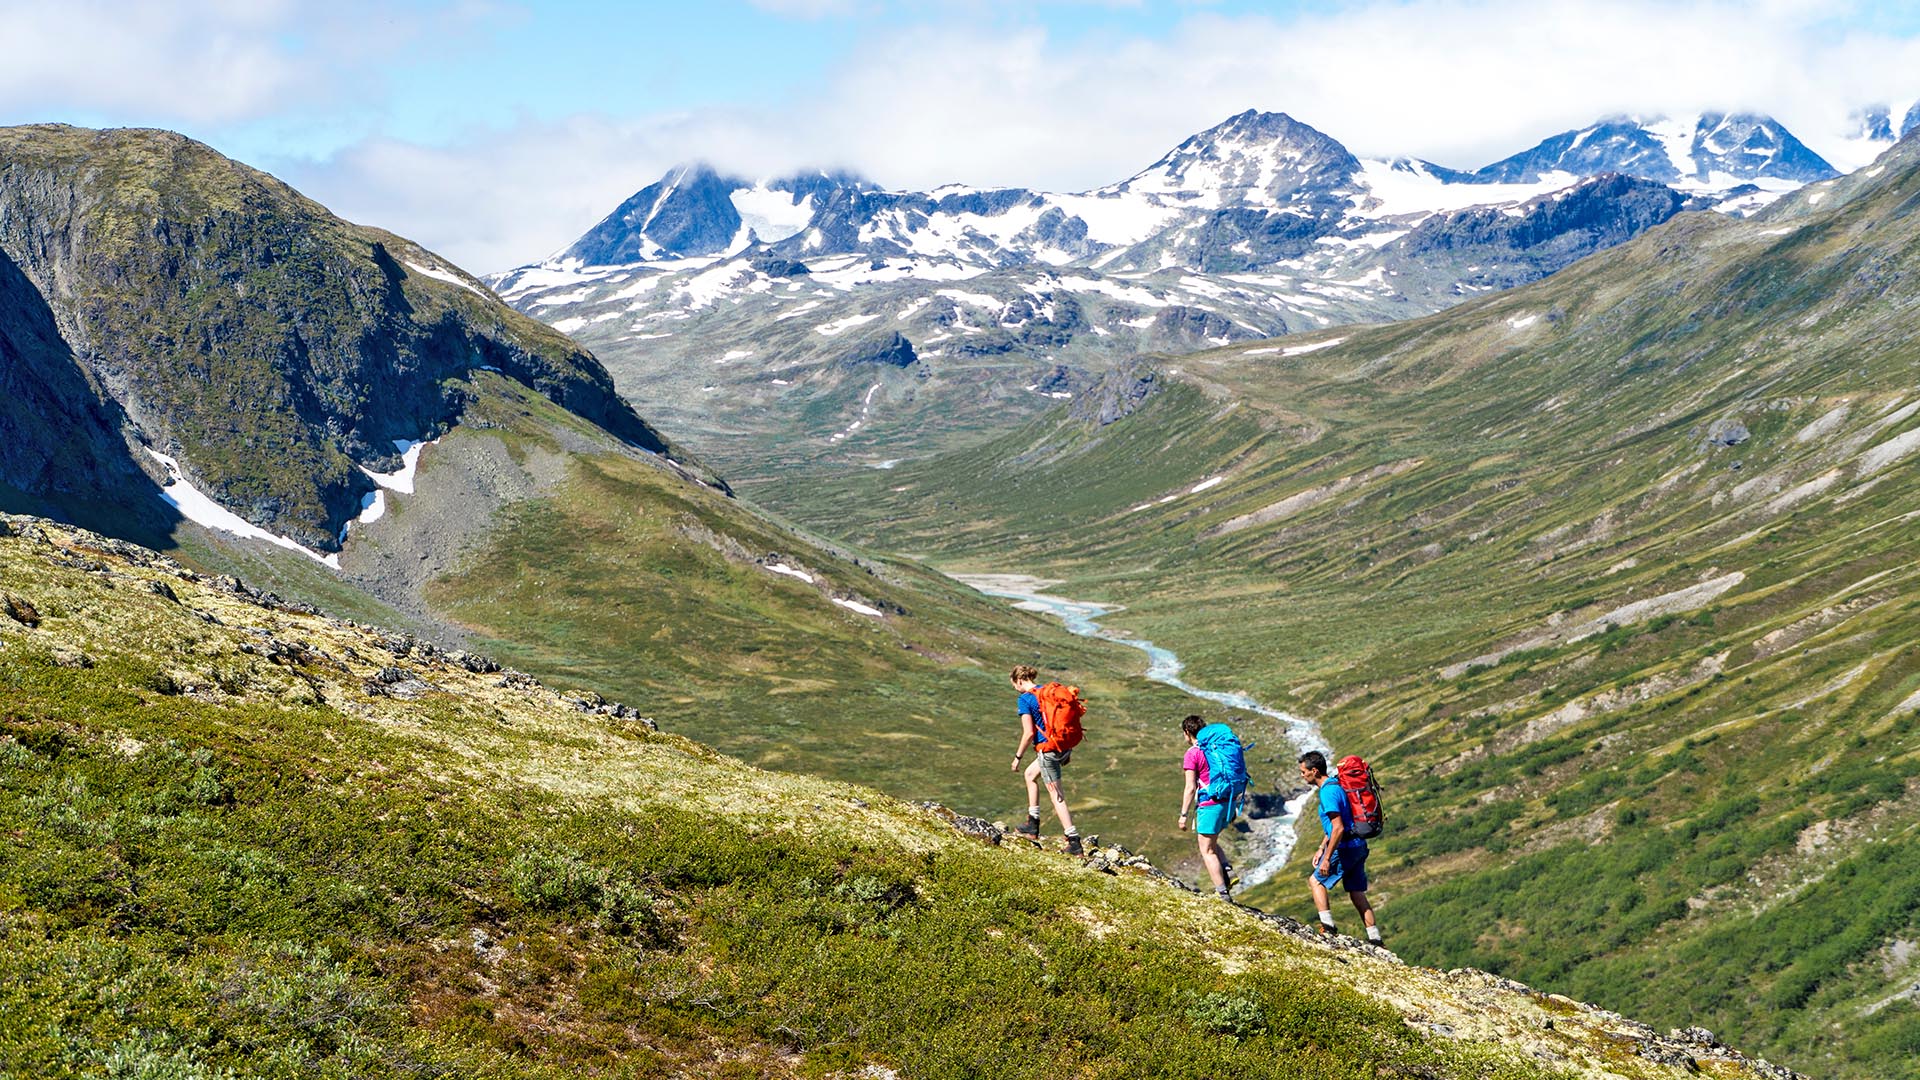 Three hikers on a green hillside in front of a valley with a glacier river and high mountains.